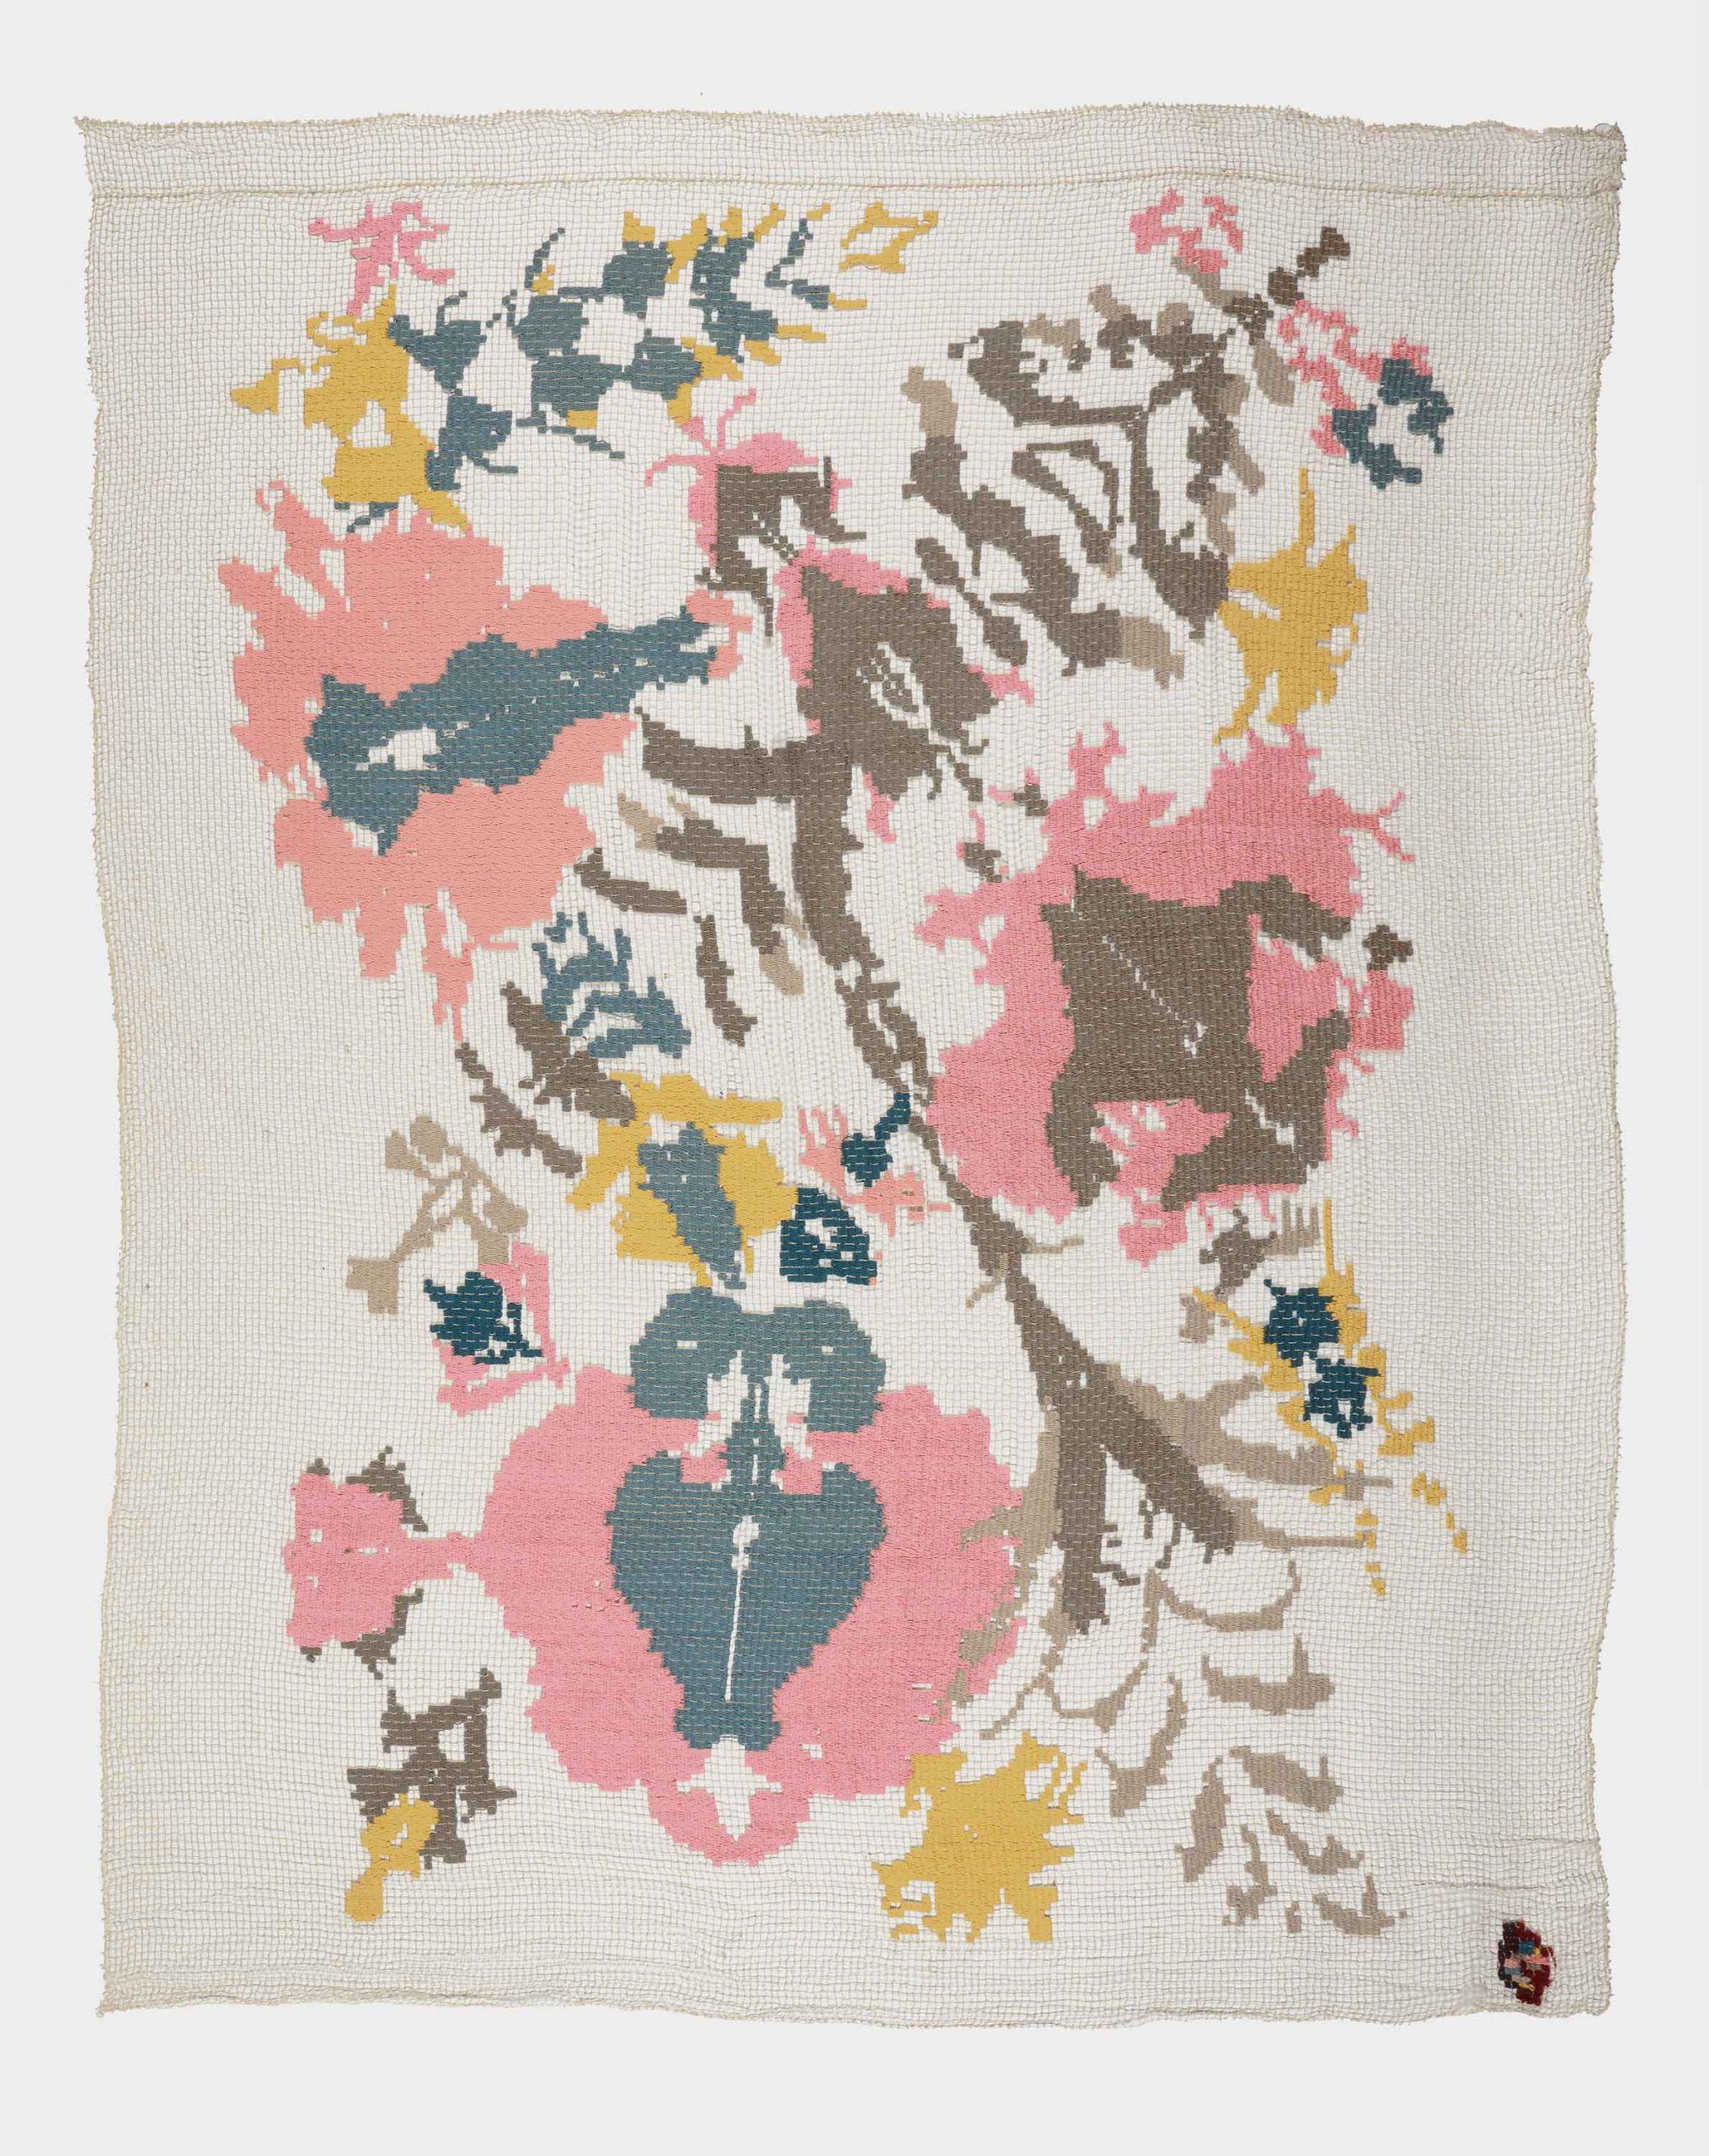 Embroidery (1920s textile work) by Herta Ottolenghi Wedekind